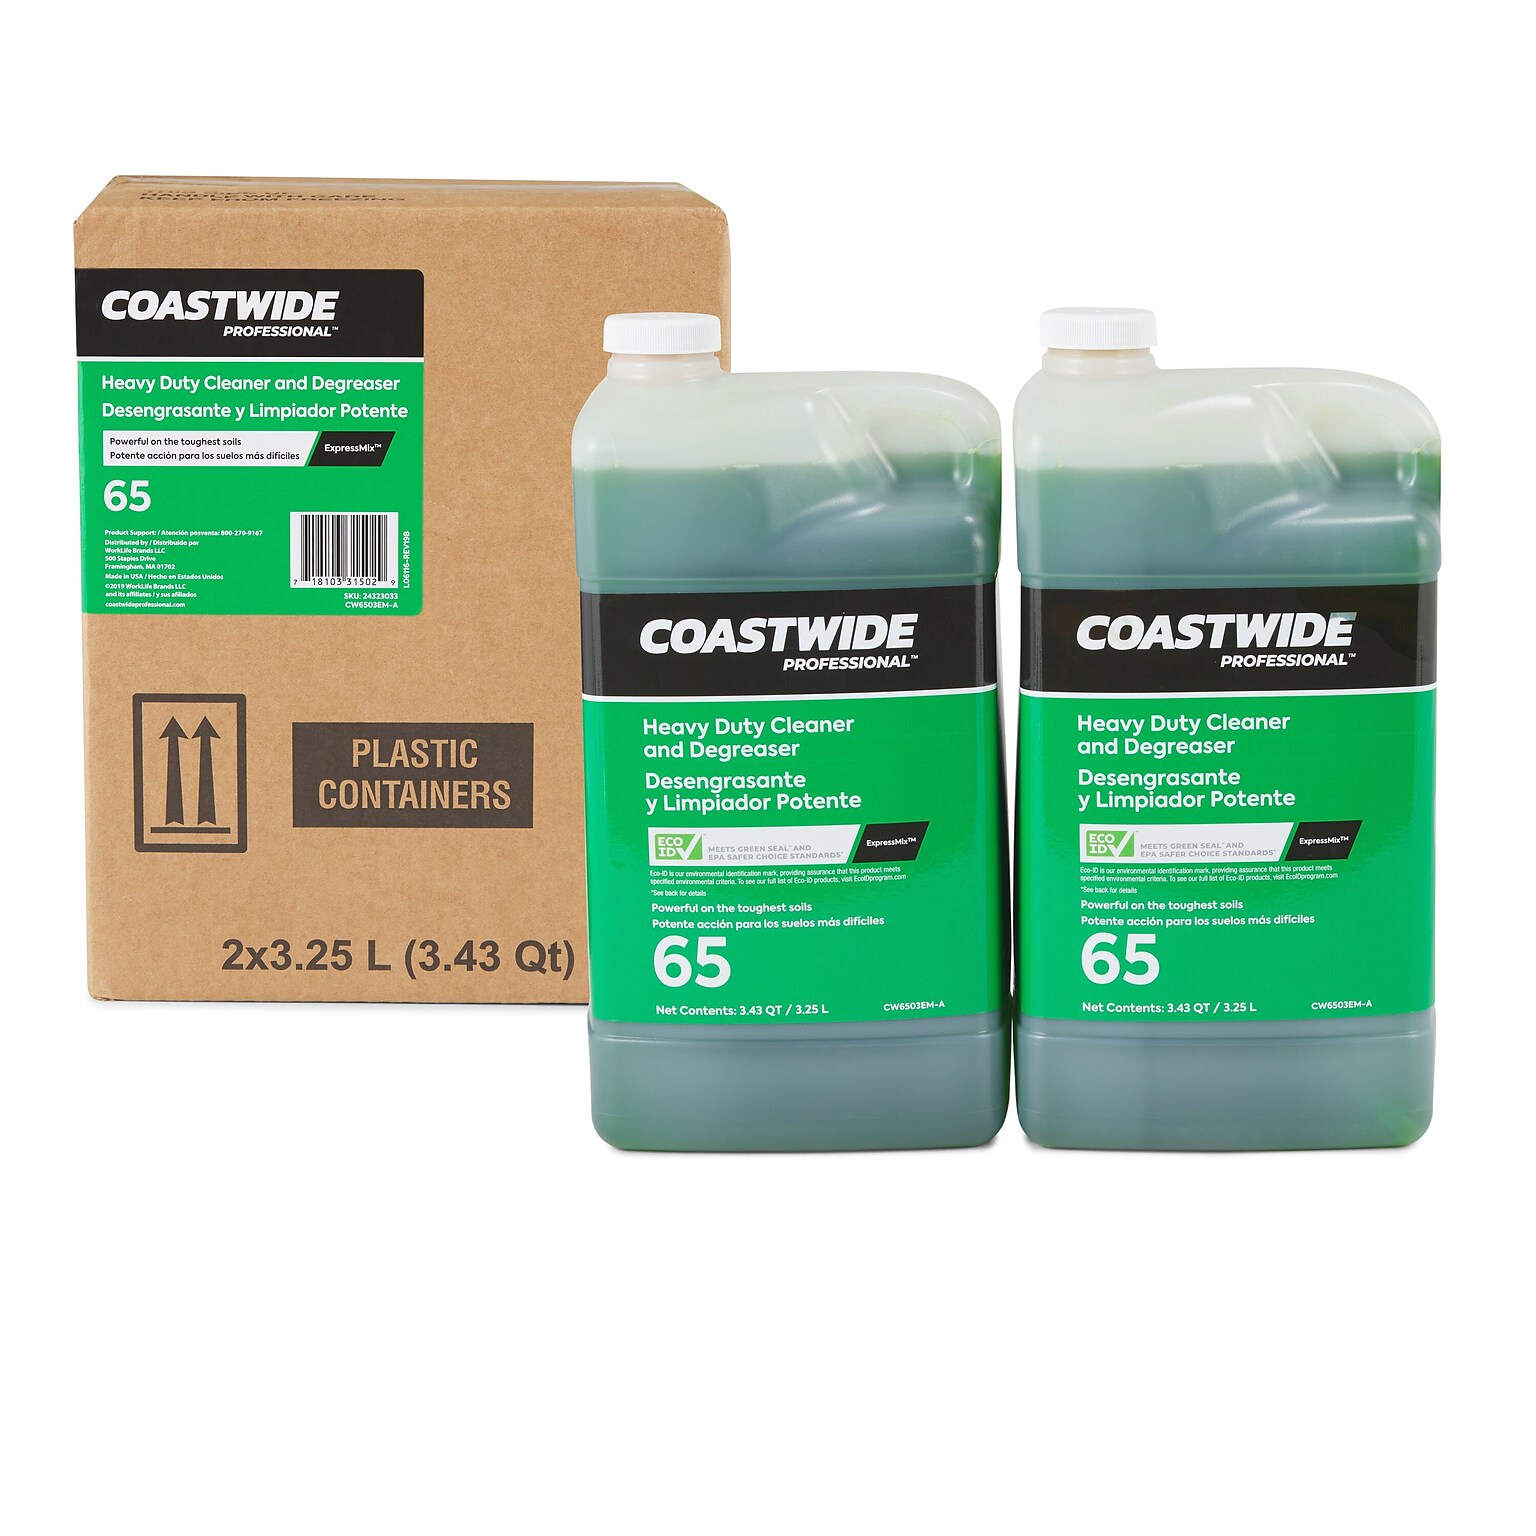 Coastwide Professional Cleaner and Degreaser 65 Heavy-Duty Concentrate for ExpressMix, 3.25L, 2/CT (CW6503EM-A)